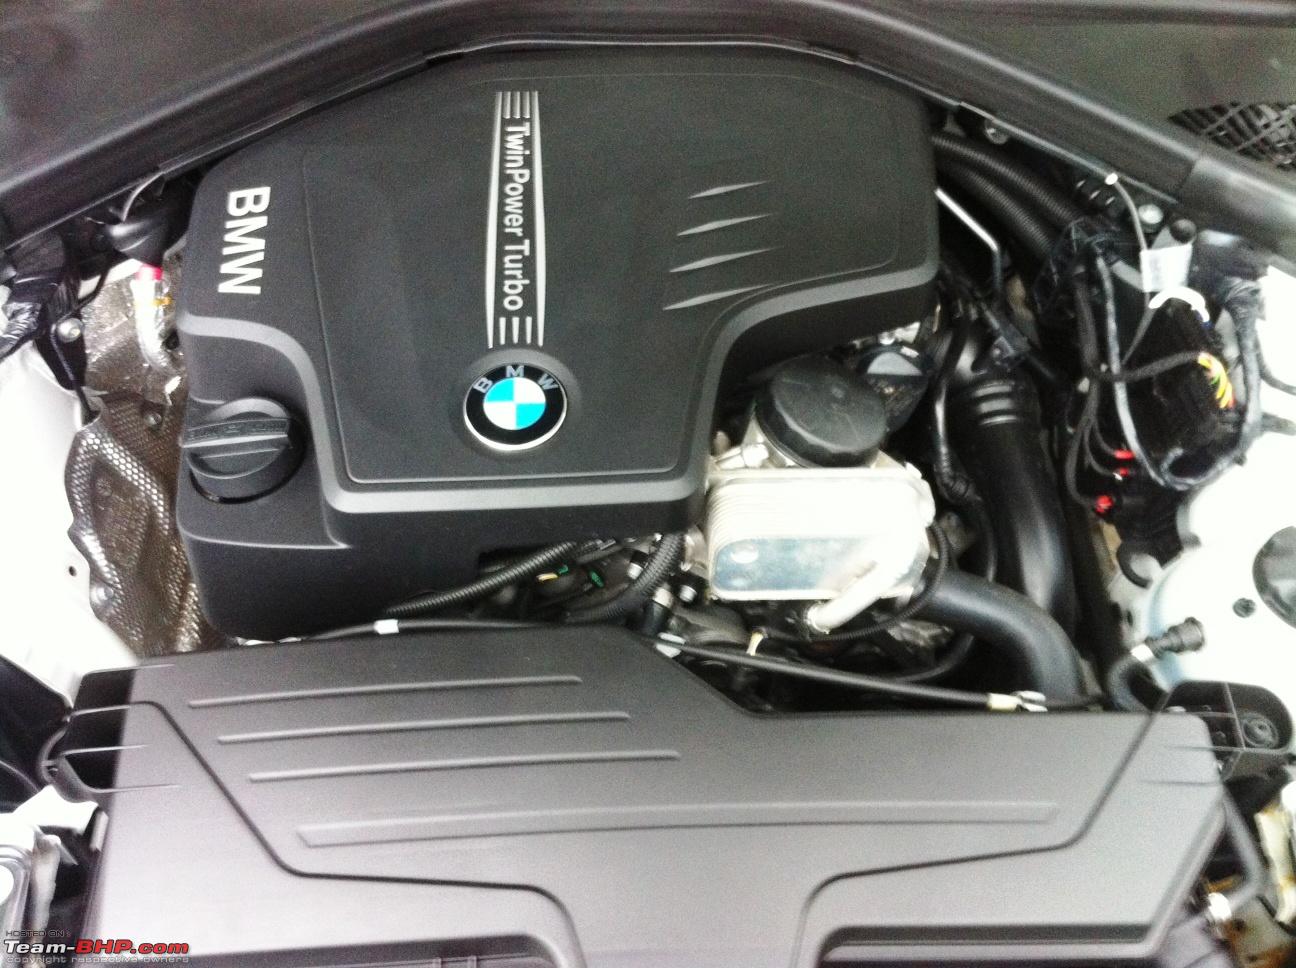 The Ultimat3 F30 Bmw 328i Edit Upgraded With M Exhaust Injen Intake Steinbauer Power Module Team Bhp